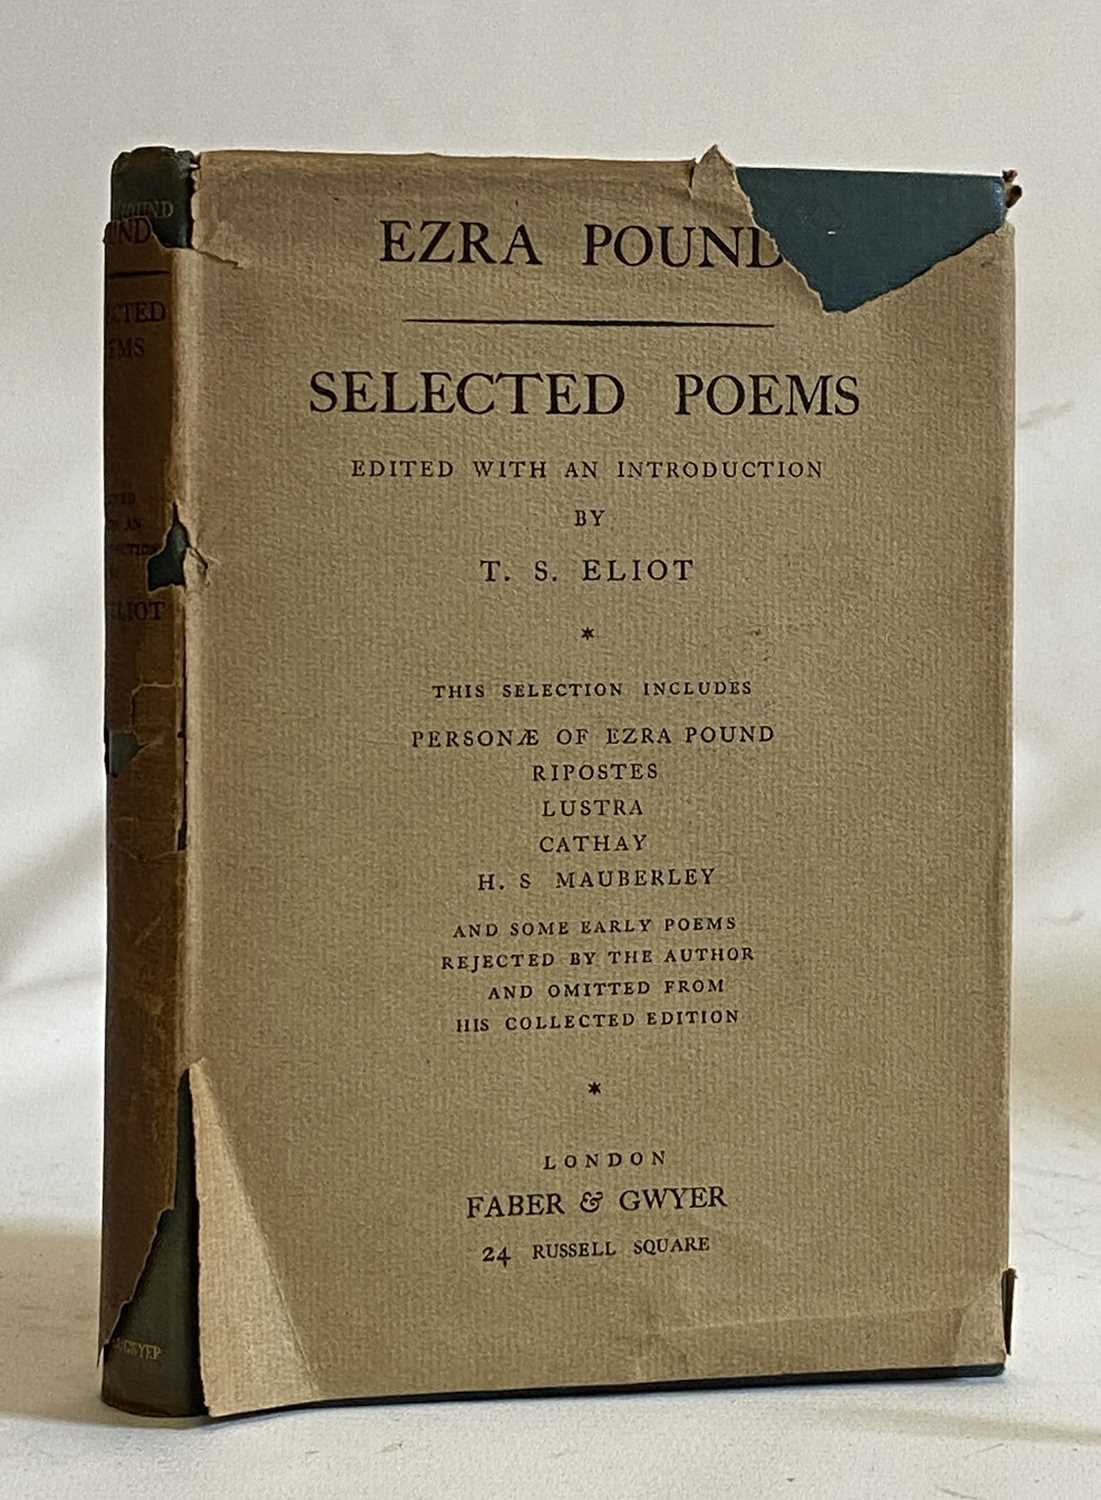 EZRA POUND, SELECTED POEMS, edited by T S Eliot, 1928, Faber and Gwyer, Very good in a fair, torn